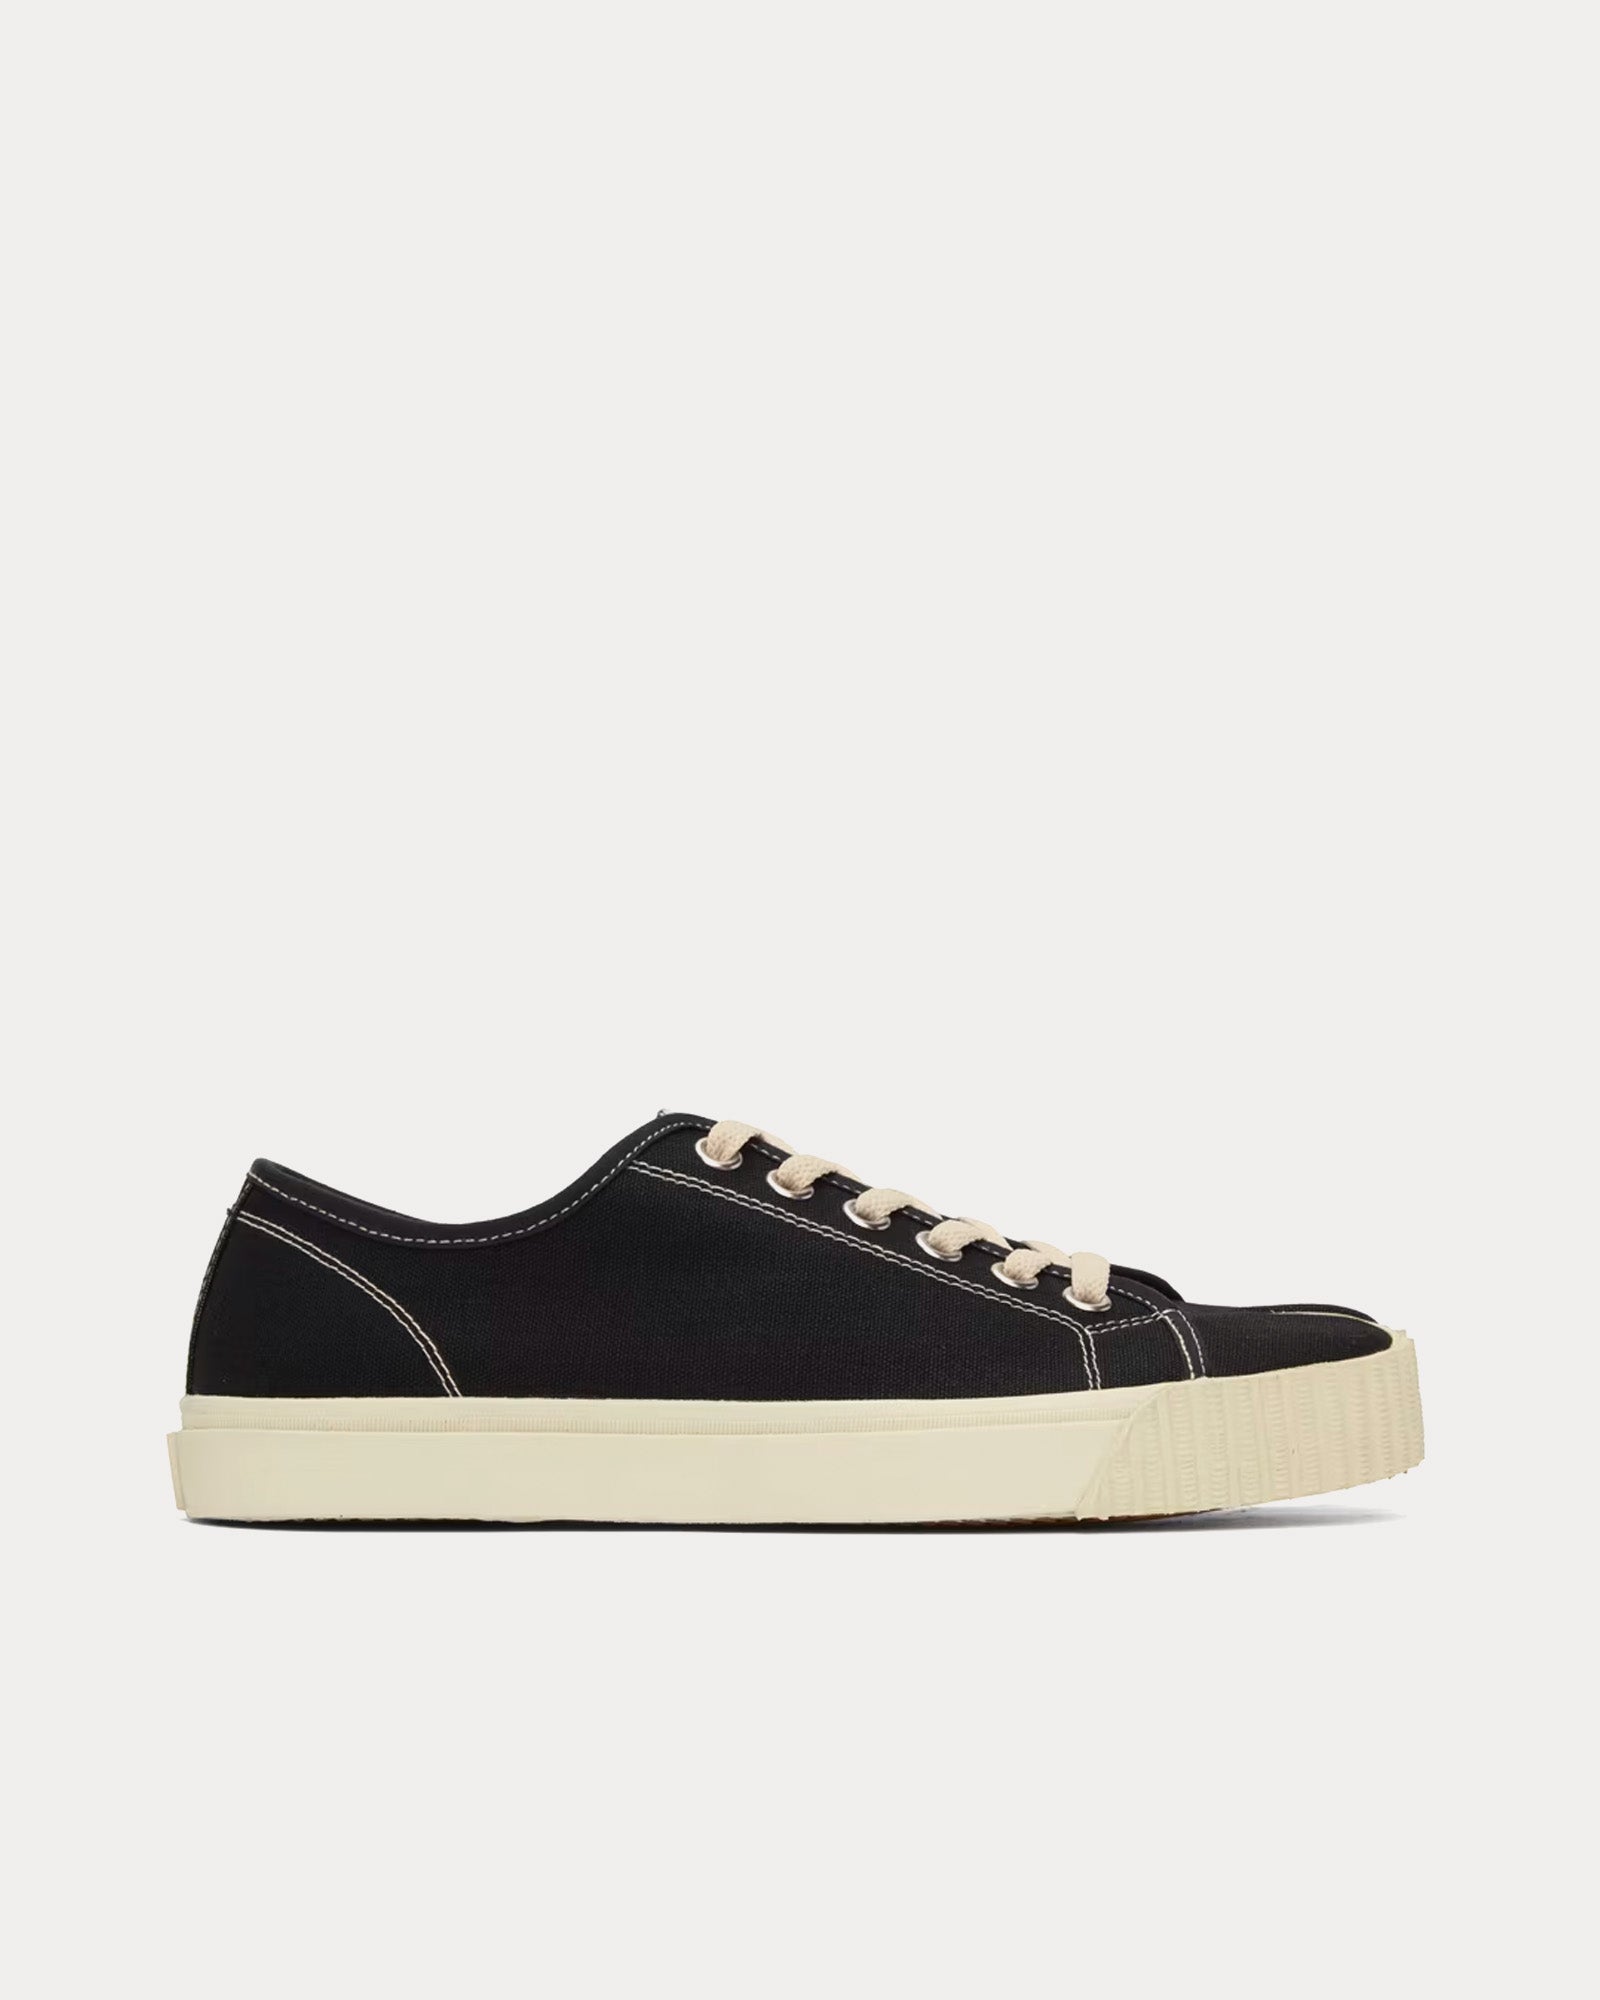 Maison Margiela - Tabi Canvas Black and White Low Top Sneakers